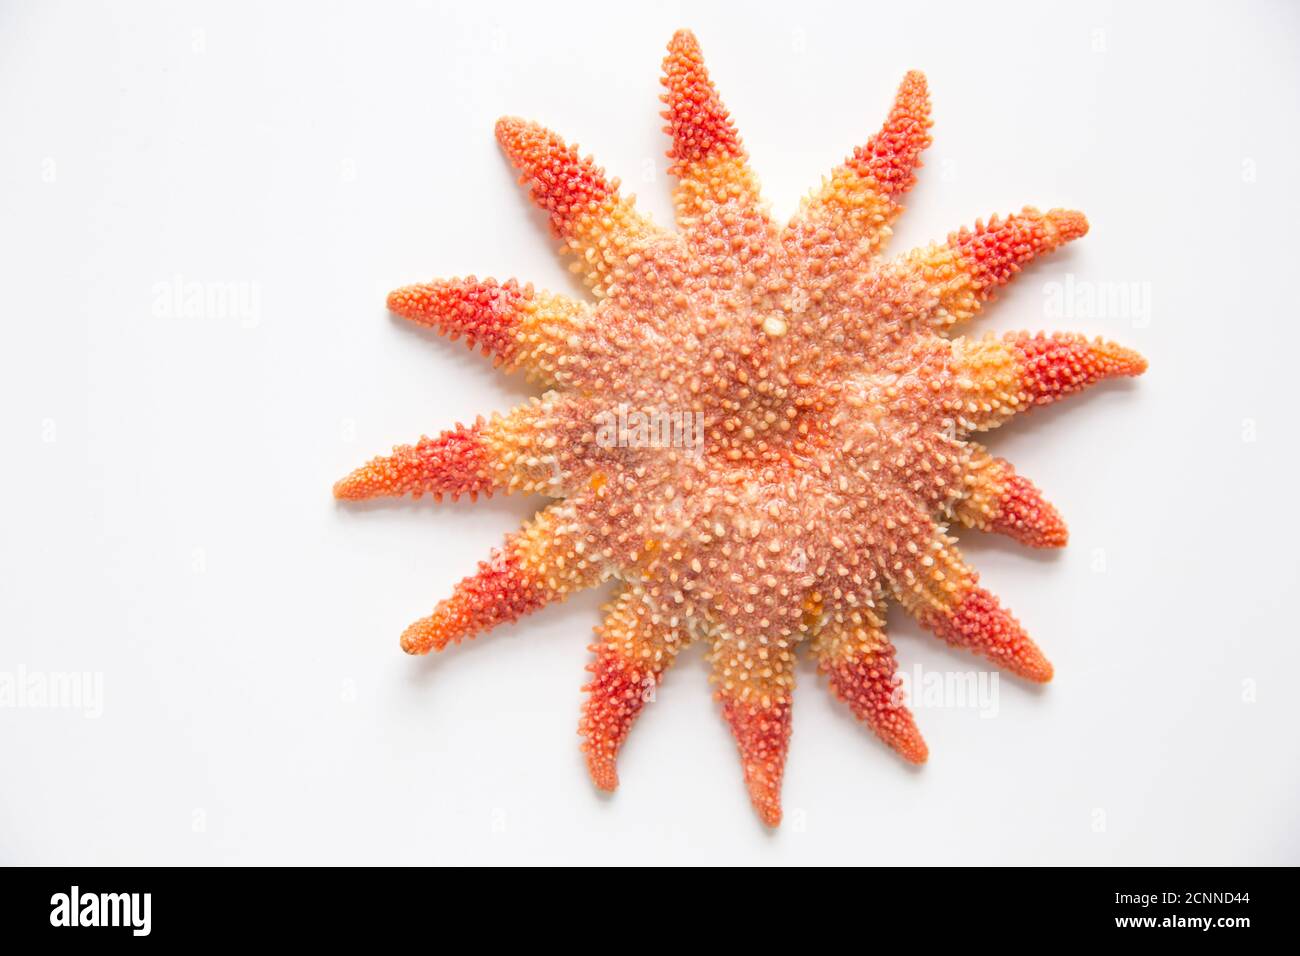 A common sunstar, Crossaster papposus, photographed on a white background. Dorset England UK GB Stock Photo